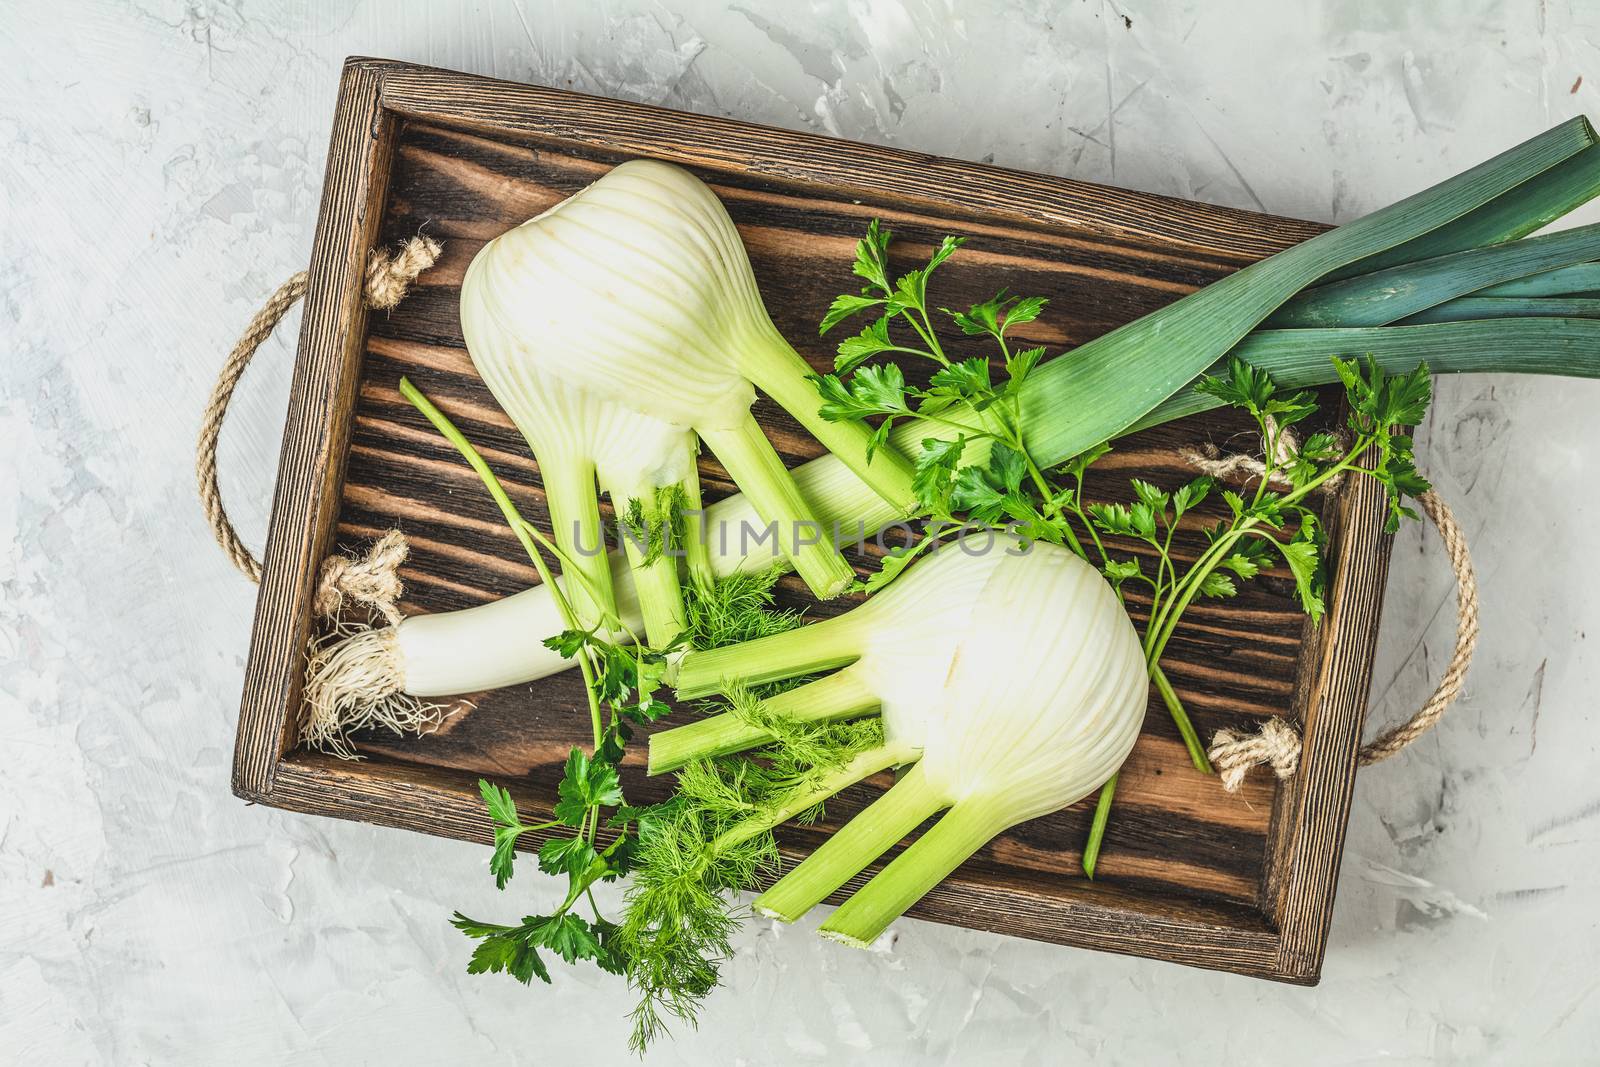 Fresh Florence fennel bulbs or Fennel bulb, leek and parsley in wooden box with dried grass on light gray concrete background. Healthy and benefits of Florence fennel bulbs.